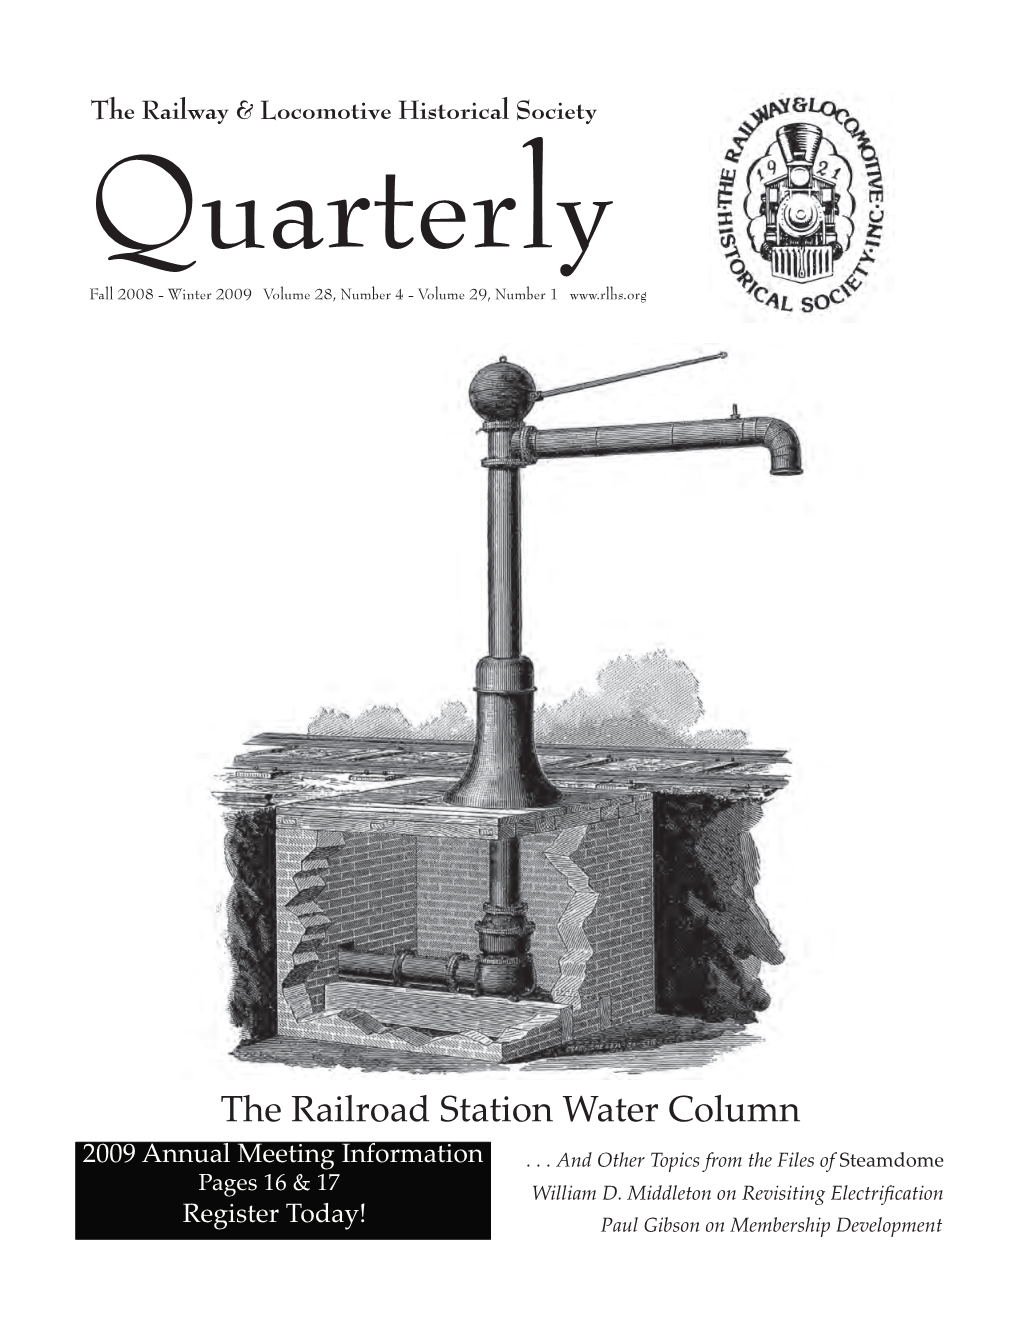 The Railroad Station Water Column